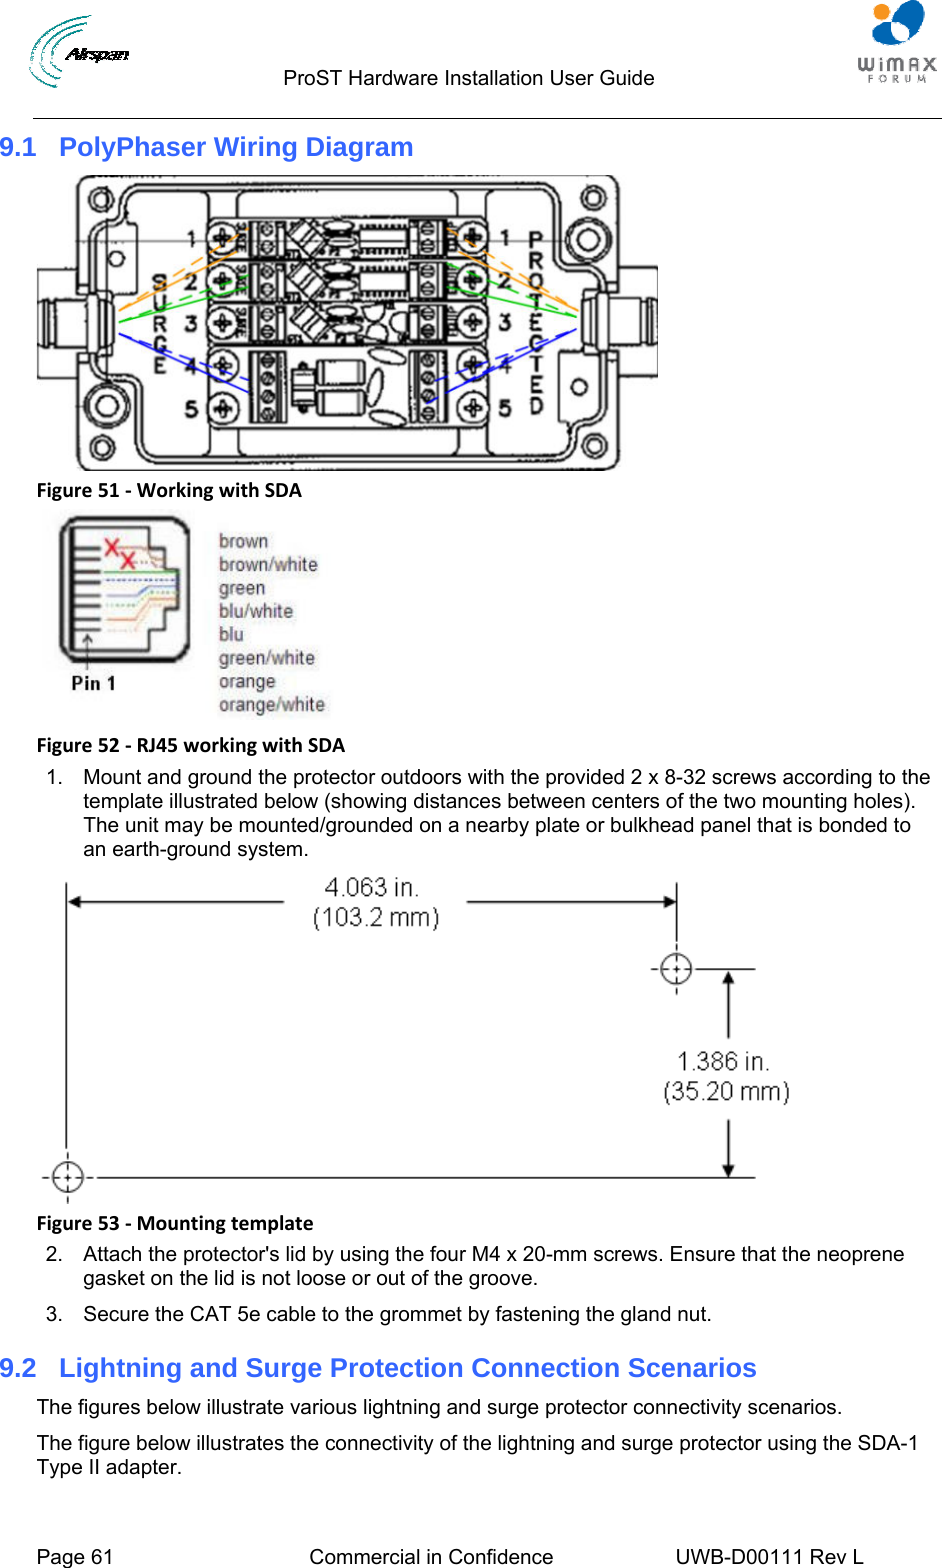                                  ProST Hardware Installation User Guide  Page 61  Commercial in Confidence  UWB-D00111 Rev L   9.1  PolyPhaser Wiring Diagram  Figure51‐WorkingwithSDA Figure52‐RJ45workingwithSDA1.  Mount and ground the protector outdoors with the provided 2 x 8-32 screws according to the template illustrated below (showing distances between centers of the two mounting holes). The unit may be mounted/grounded on a nearby plate or bulkhead panel that is bonded to an earth-ground system.  Figure53‐Mountingtemplate2.  Attach the protector&apos;s lid by using the four M4 x 20-mm screws. Ensure that the neoprene gasket on the lid is not loose or out of the groove. 3.  Secure the CAT 5e cable to the grommet by fastening the gland nut. 9.2  Lightning and Surge Protection Connection Scenarios The figures below illustrate various lightning and surge protector connectivity scenarios. The figure below illustrates the connectivity of the lightning and surge protector using the SDA-1 Type II adapter. 